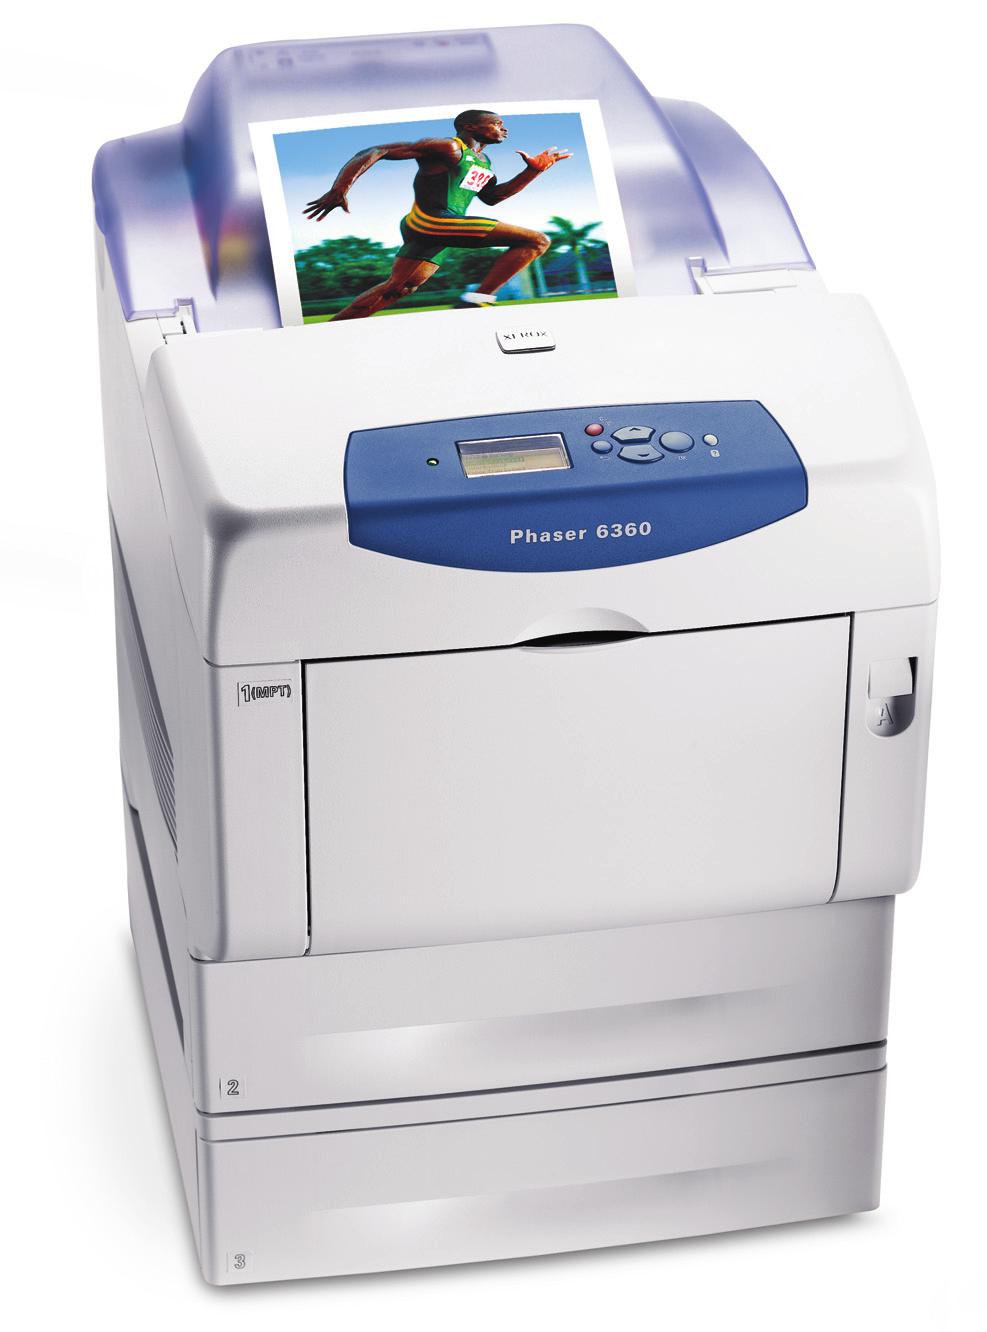 Phaser 6360 Color Laser Printer Setting the standardfor high-performance color laser printers, the Xerox Phaser 6360 leads the industry with best-in-class print speed and exceptional color